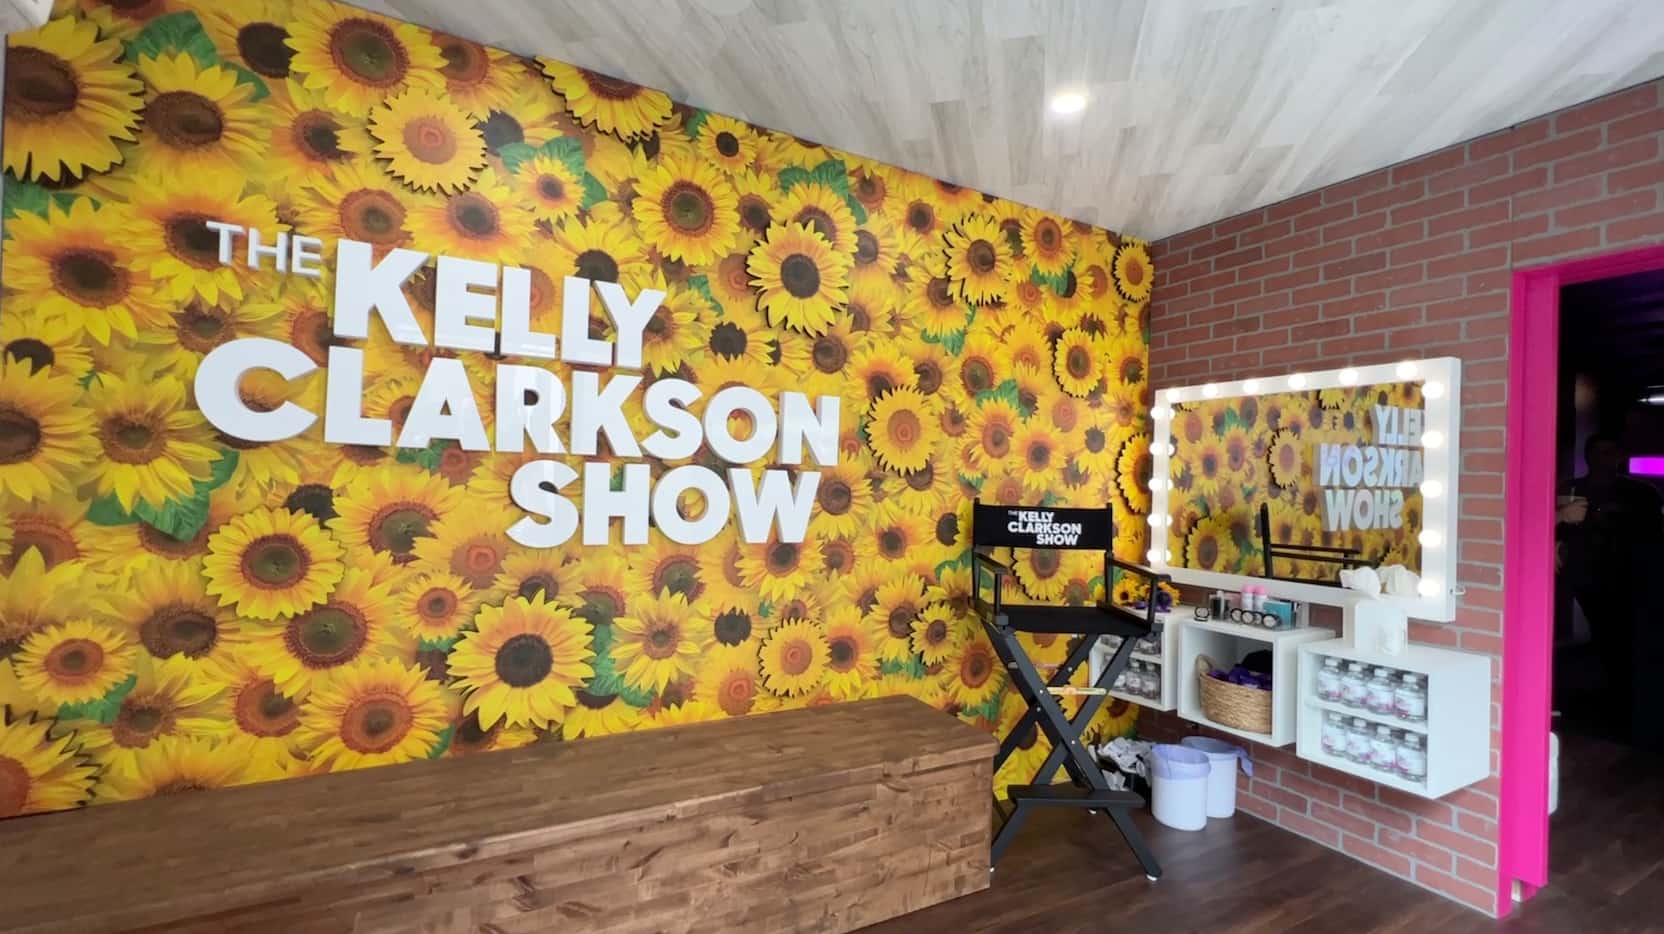 Here's an interior view of The Kelly Clarkson Show's Kellyoke bus, which is coming Klyde...